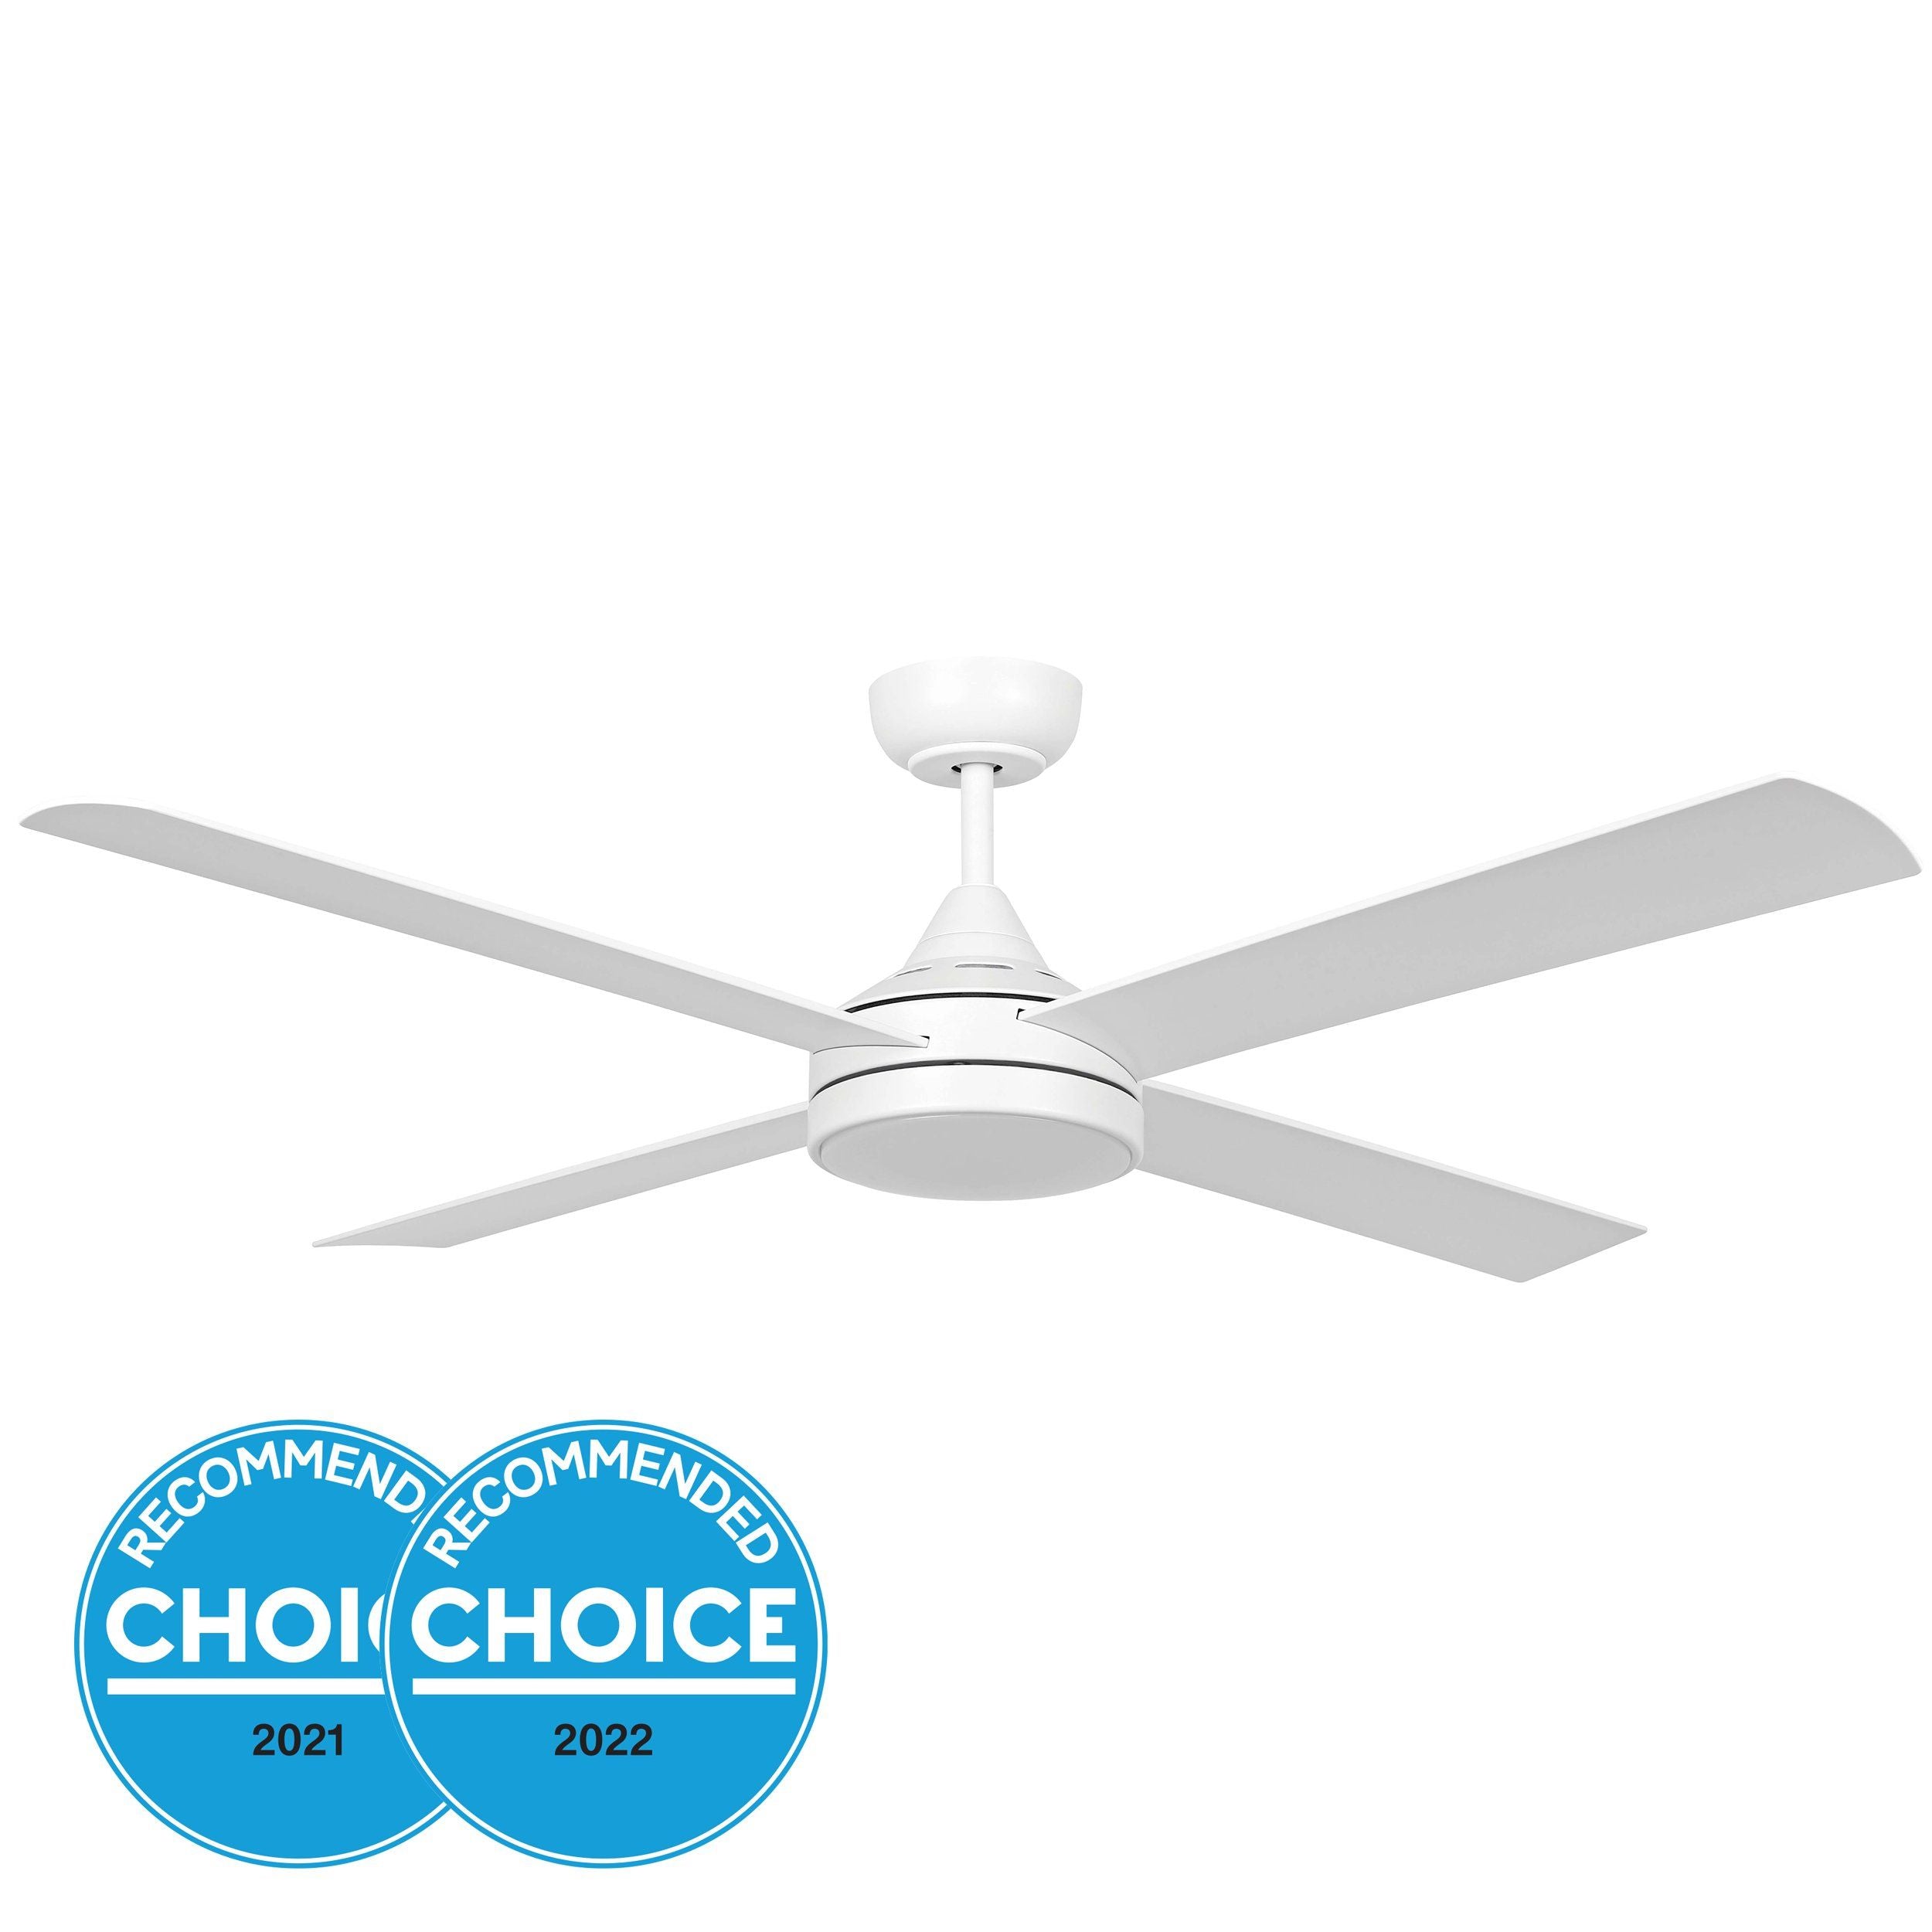 Buy DC Ceiling Fans With Light Australia Stradbroke DC Ceiling Fan 52" With LED Light Matt White - 20491701